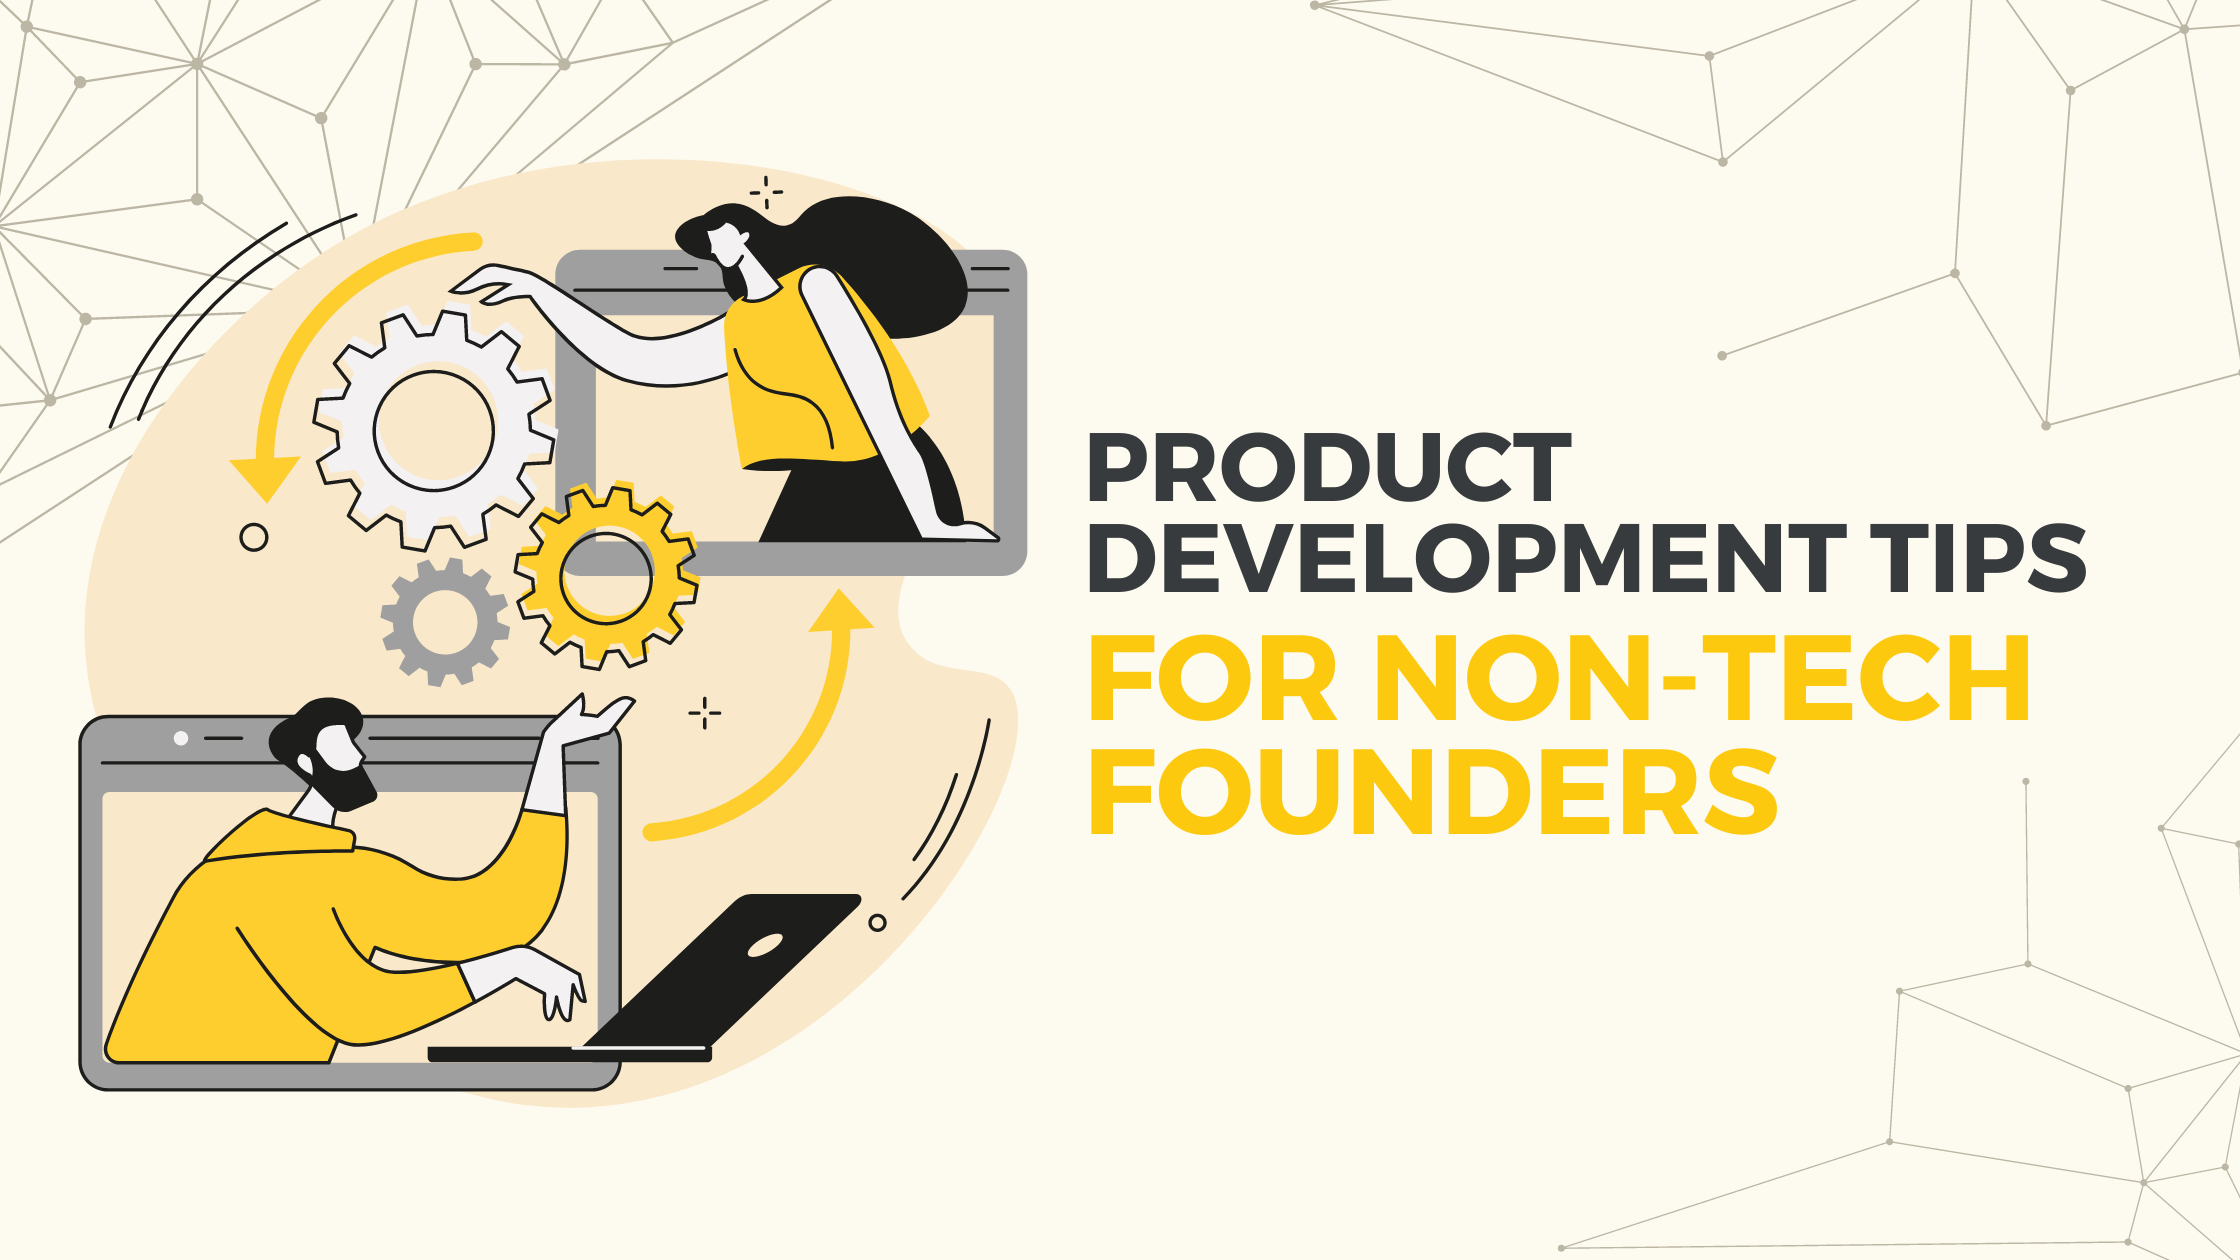 Product Development Tips for Non-Tech Founders